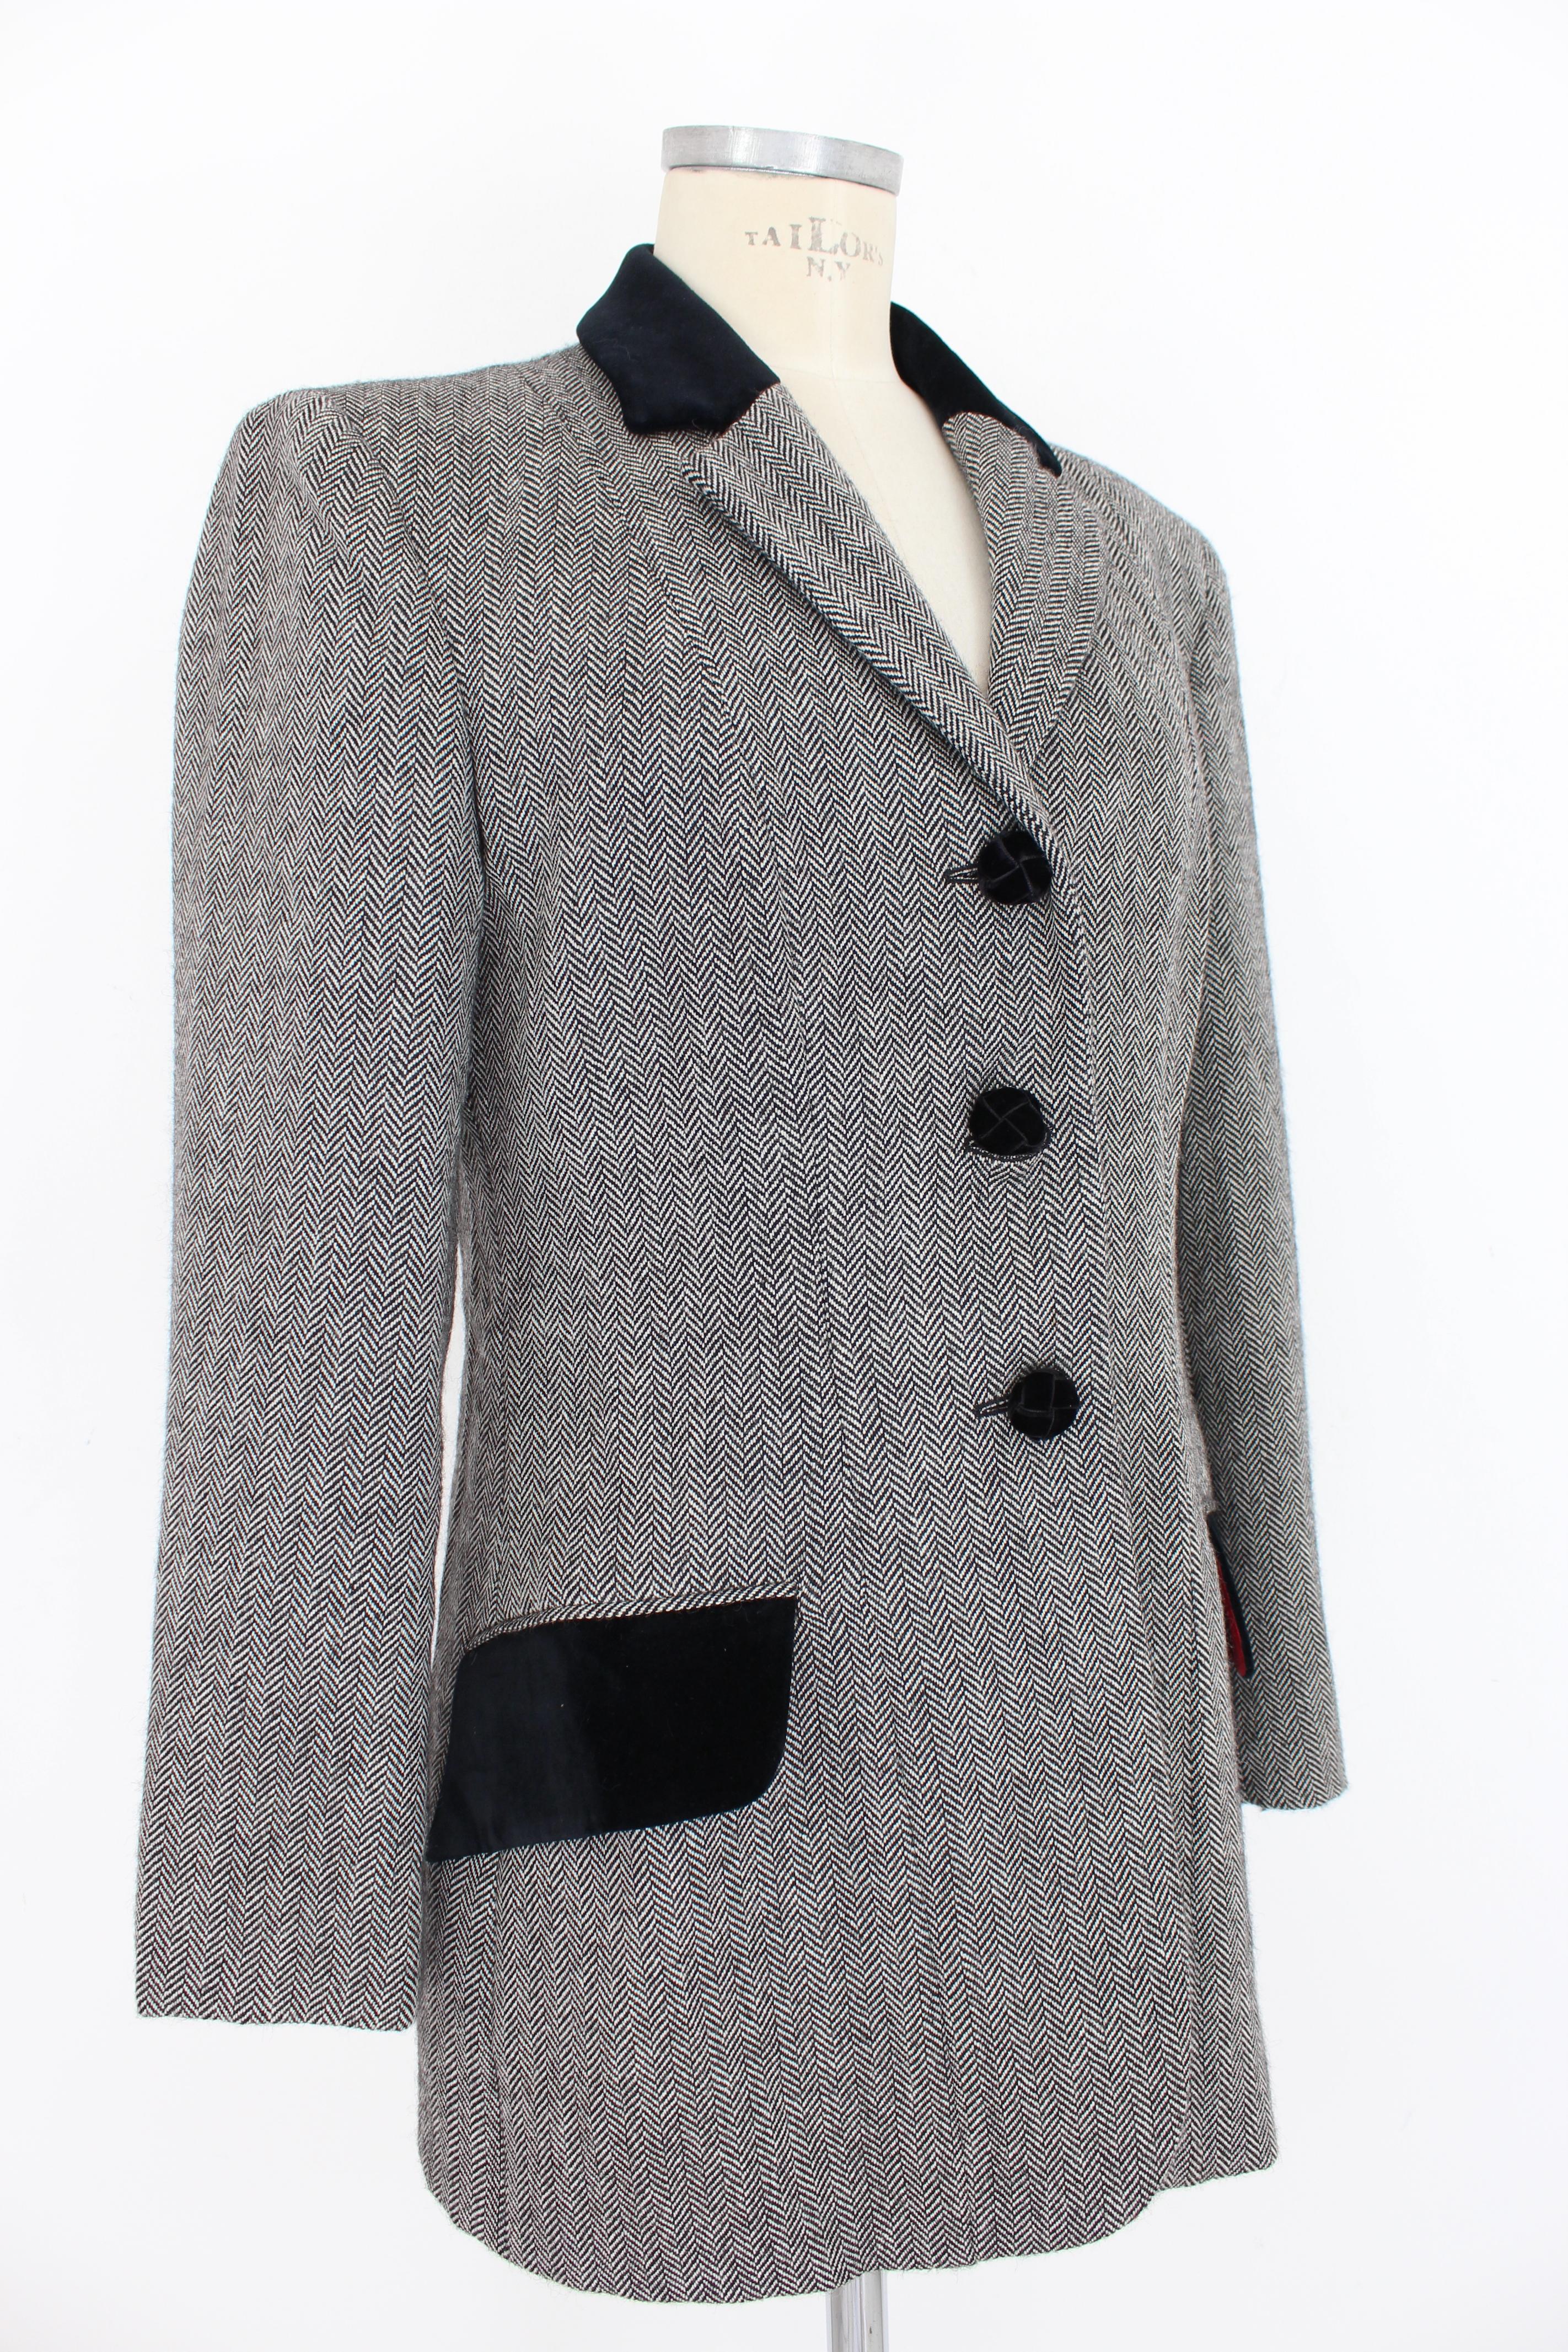 Moschino Black White Wool Tweed Jacket In Excellent Condition In Brindisi, Bt